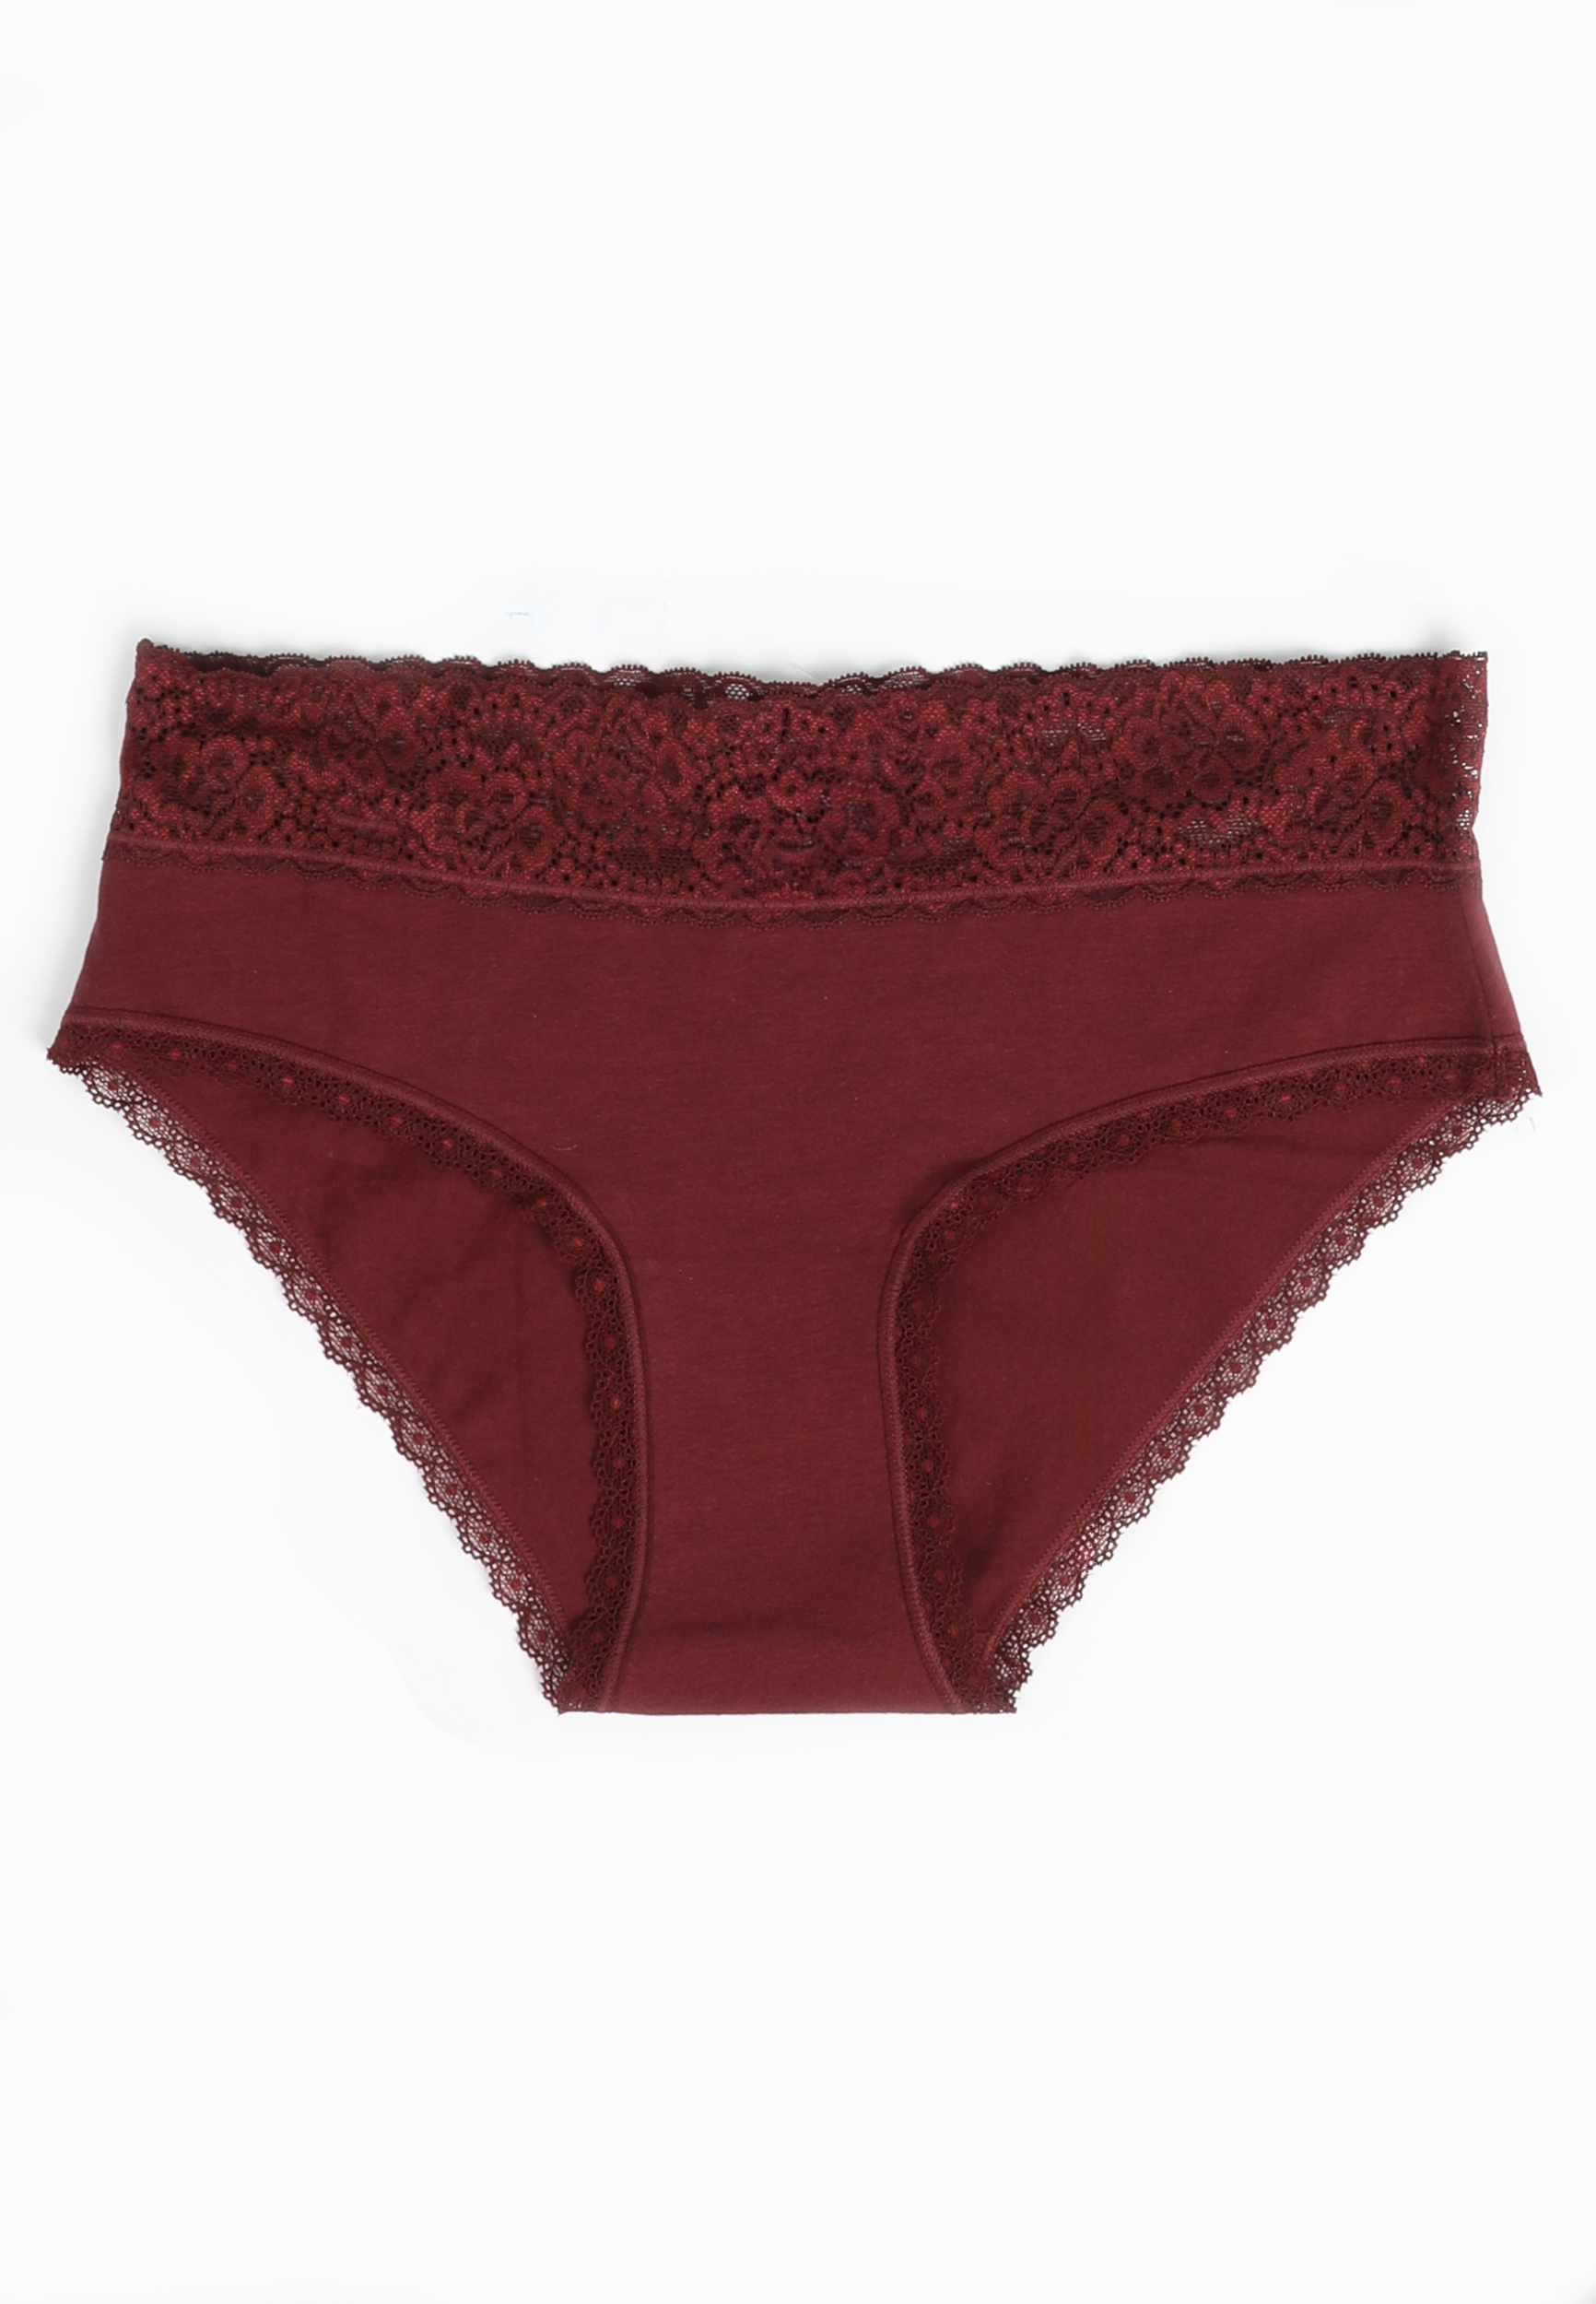 Up to 70% off Lingerie: Knickers / Underwear $7, Shorts from $20, Bodysuits  $30 + $9.50 Shipping @ Bras N Things - ChoiceCheapies